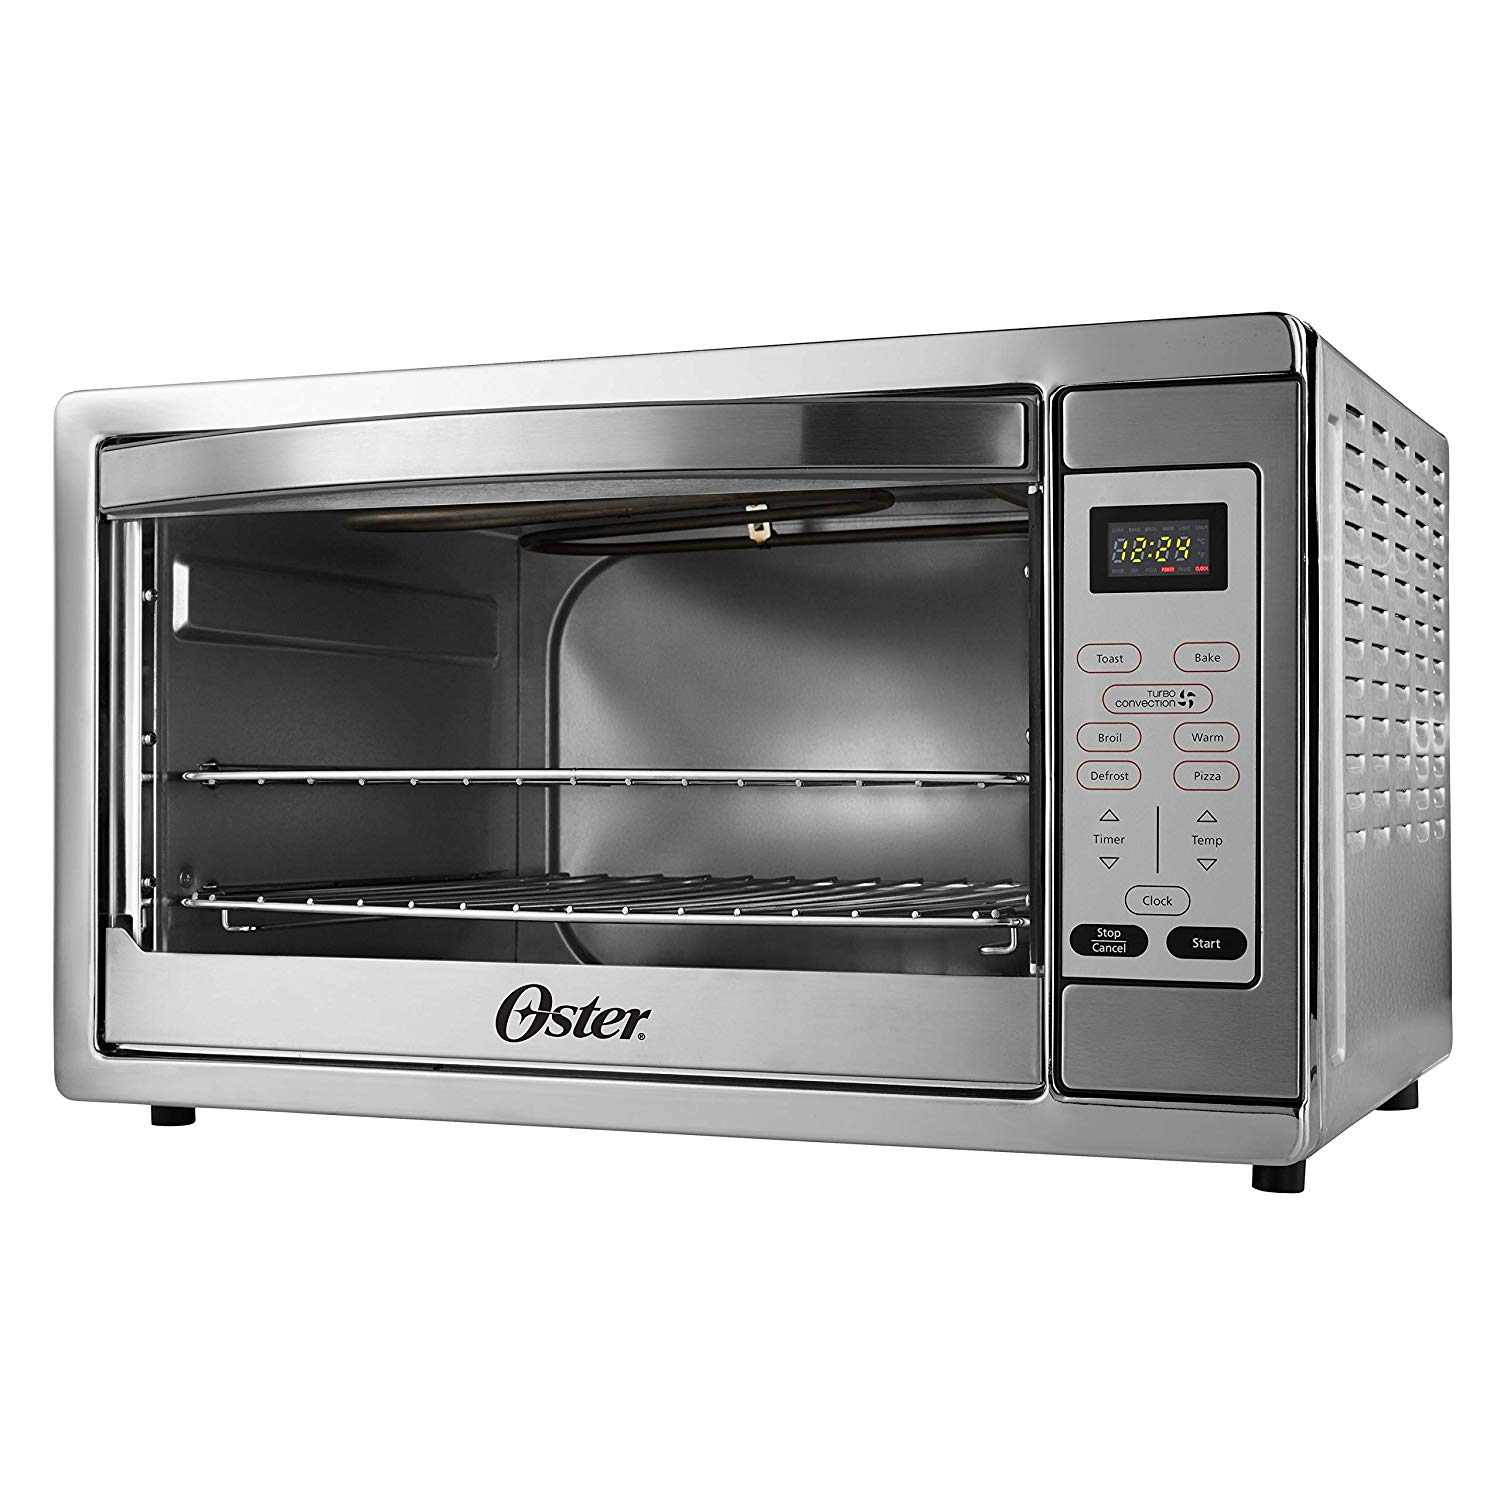 Oster XL countertop oven